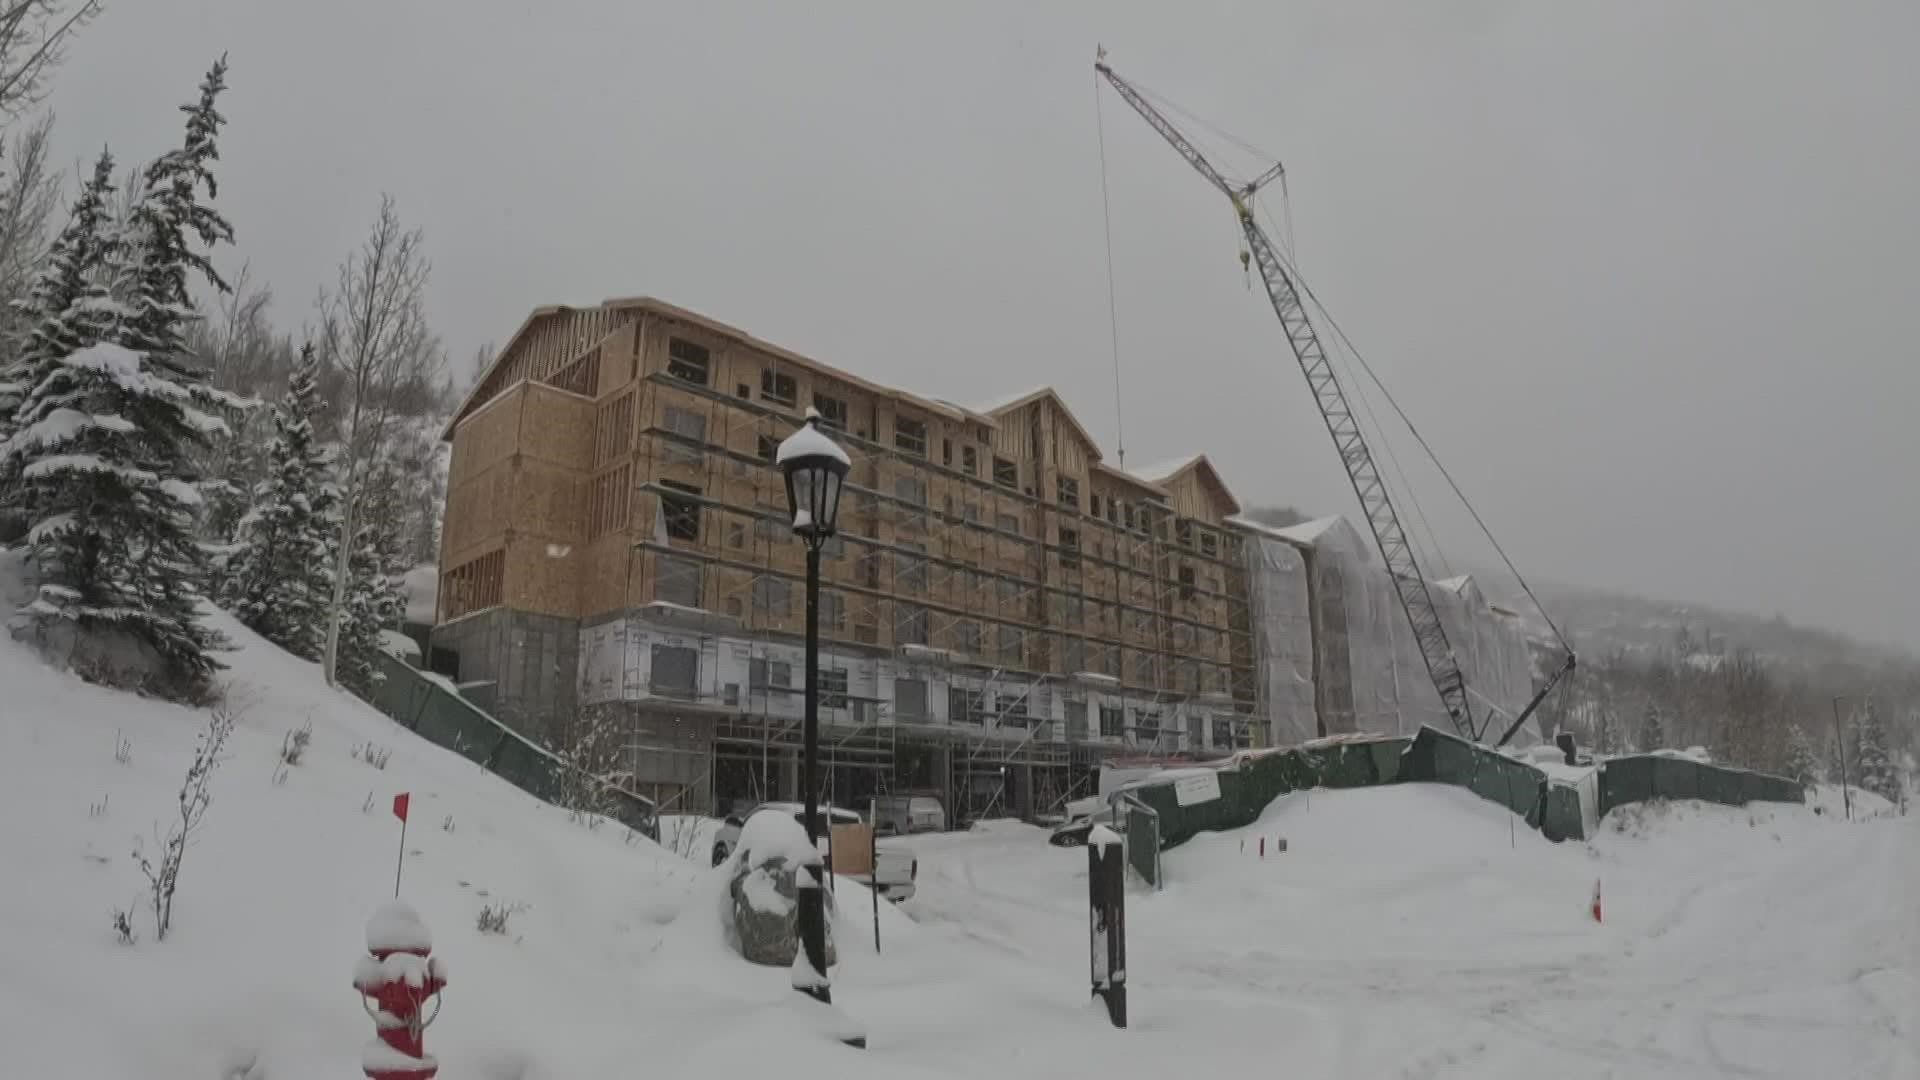 Affordable housing has been a big problem for people who work in Vail but city leaders have a plan in the works.